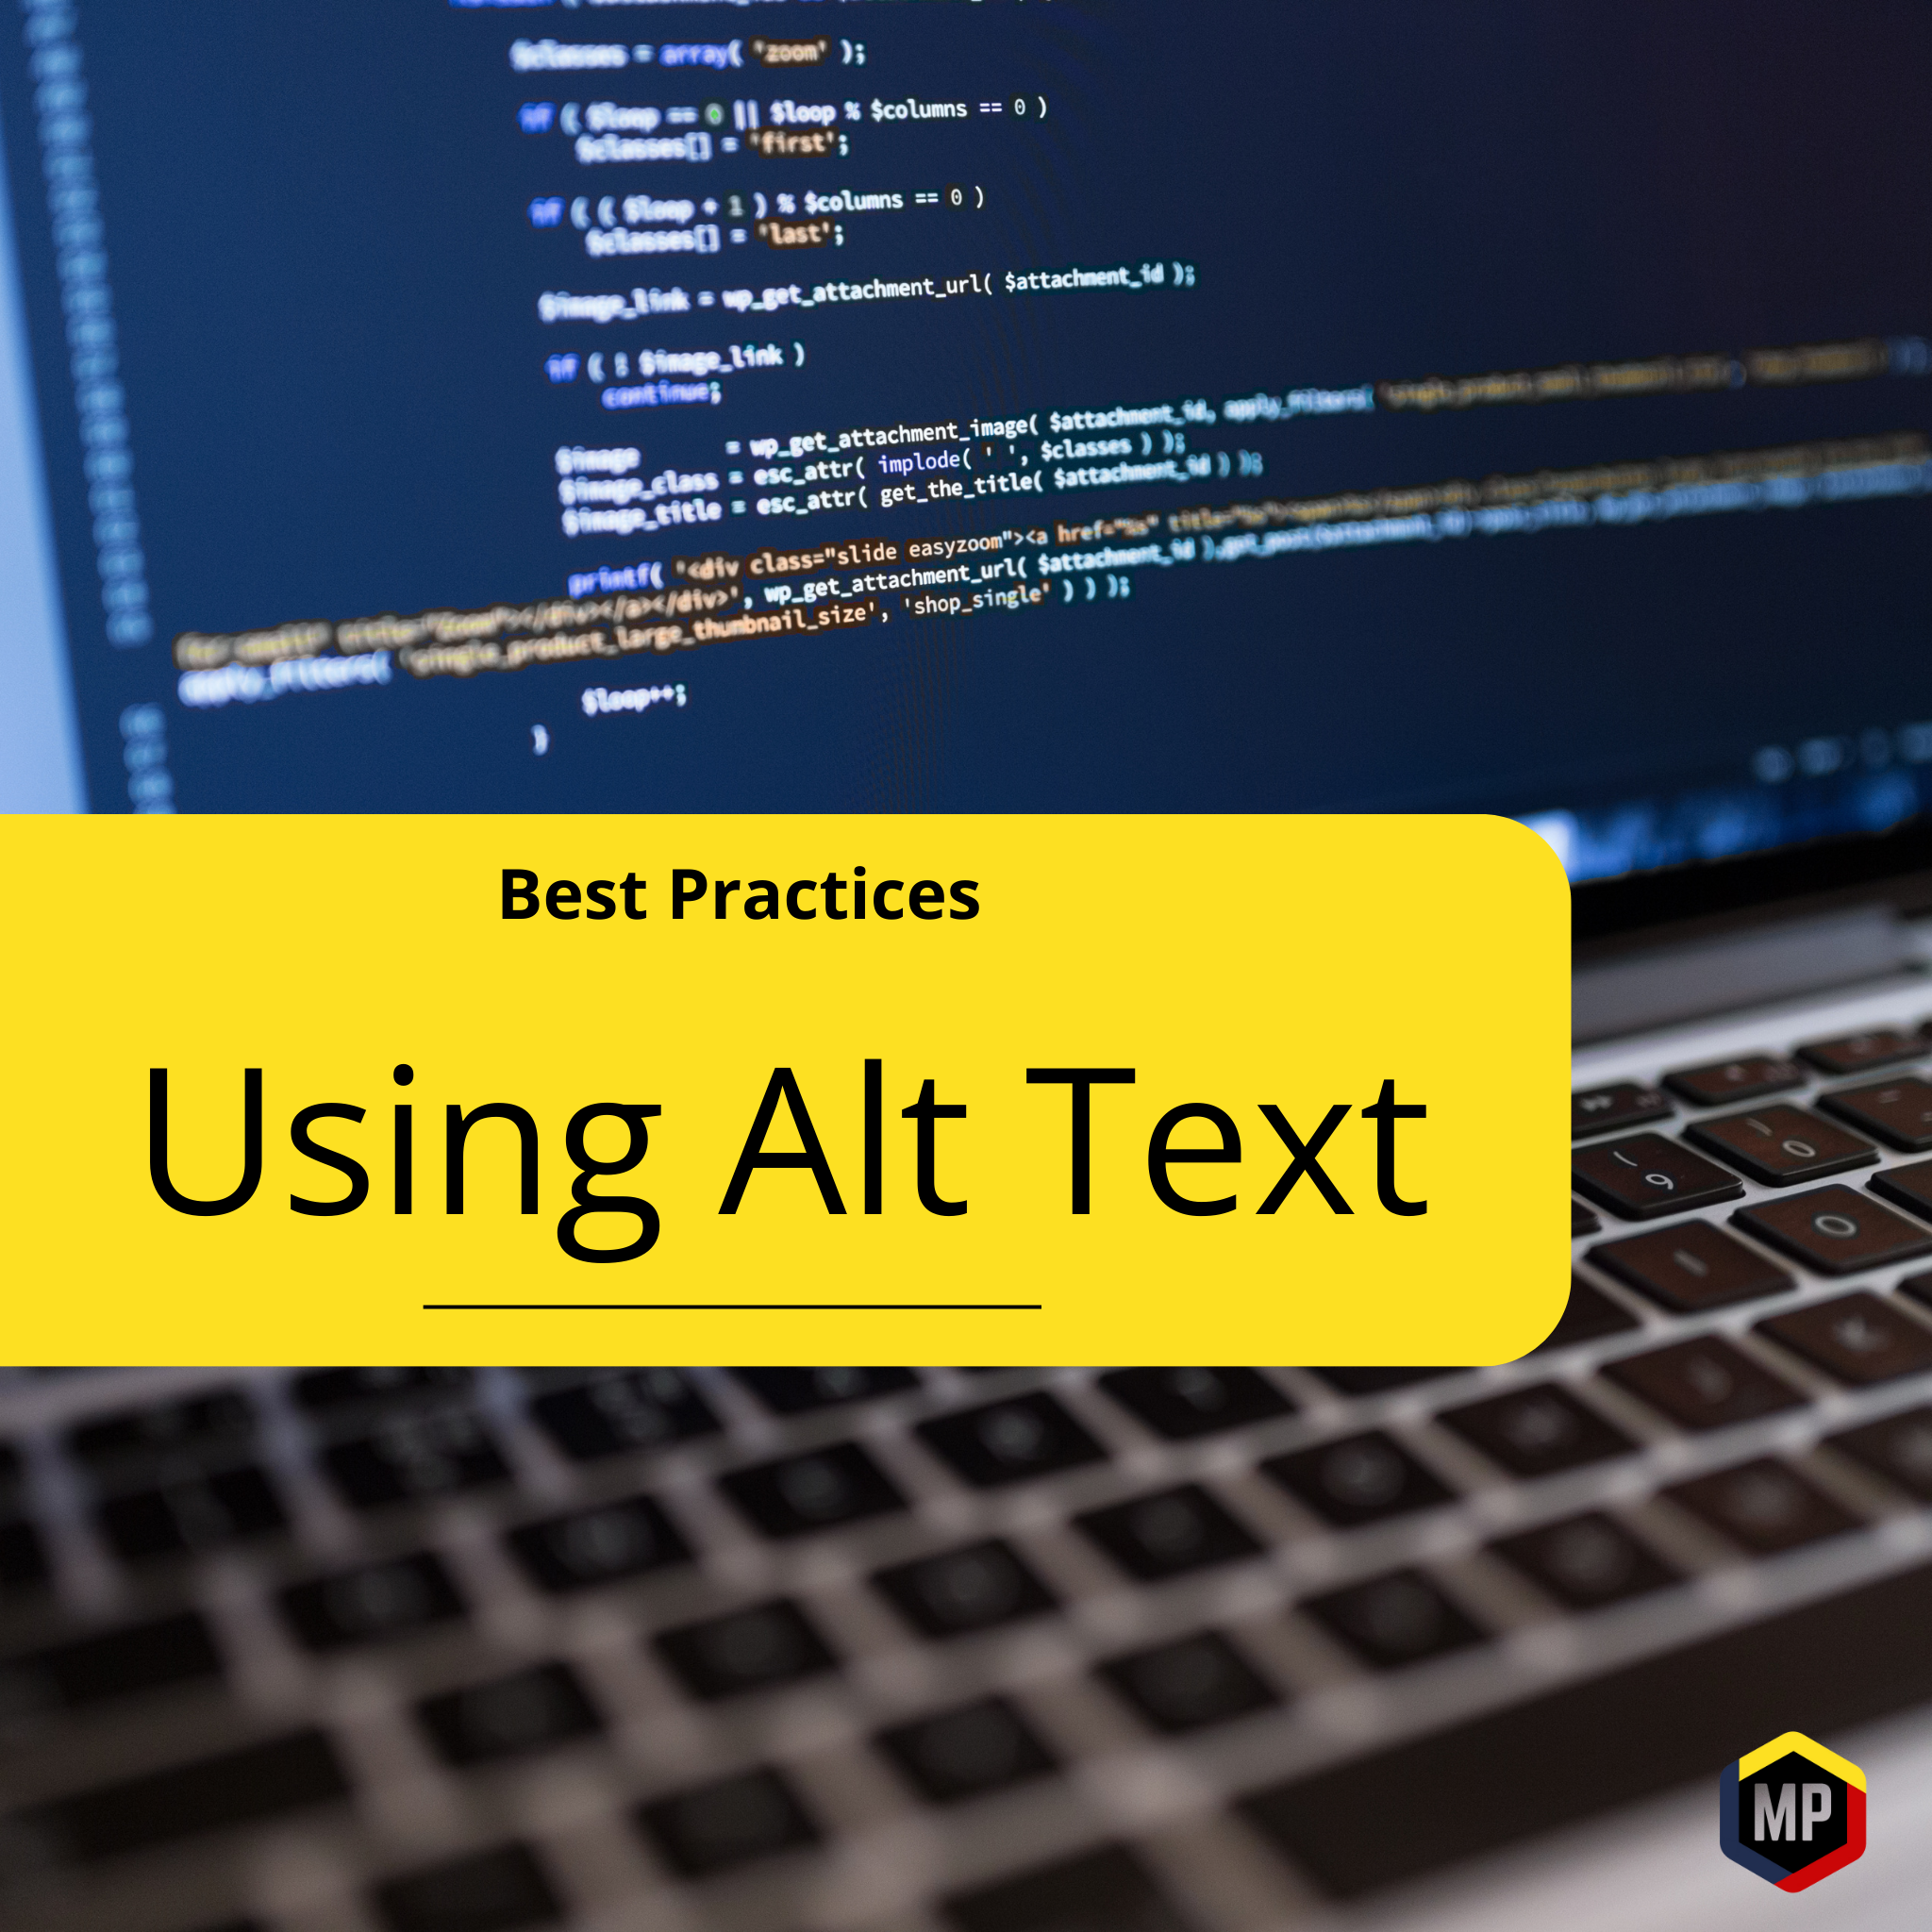 Blog article on alt text and the best ways to use alt text